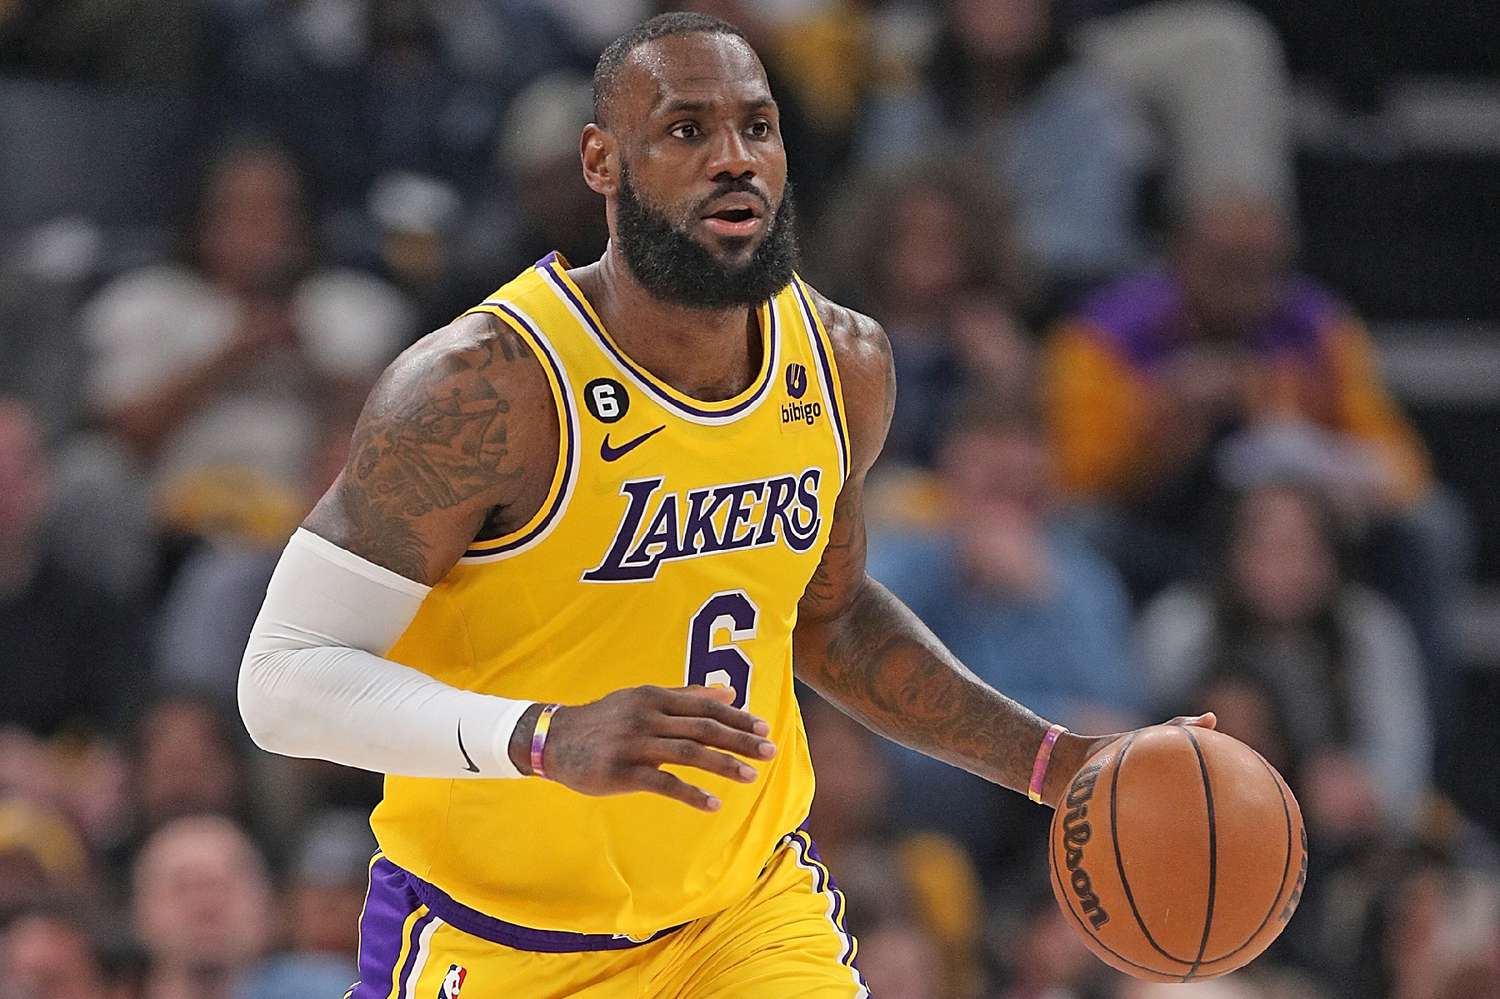 The LeBron James All-NBA Team Controversy, A Surprising Snub Shakes the Basketball World